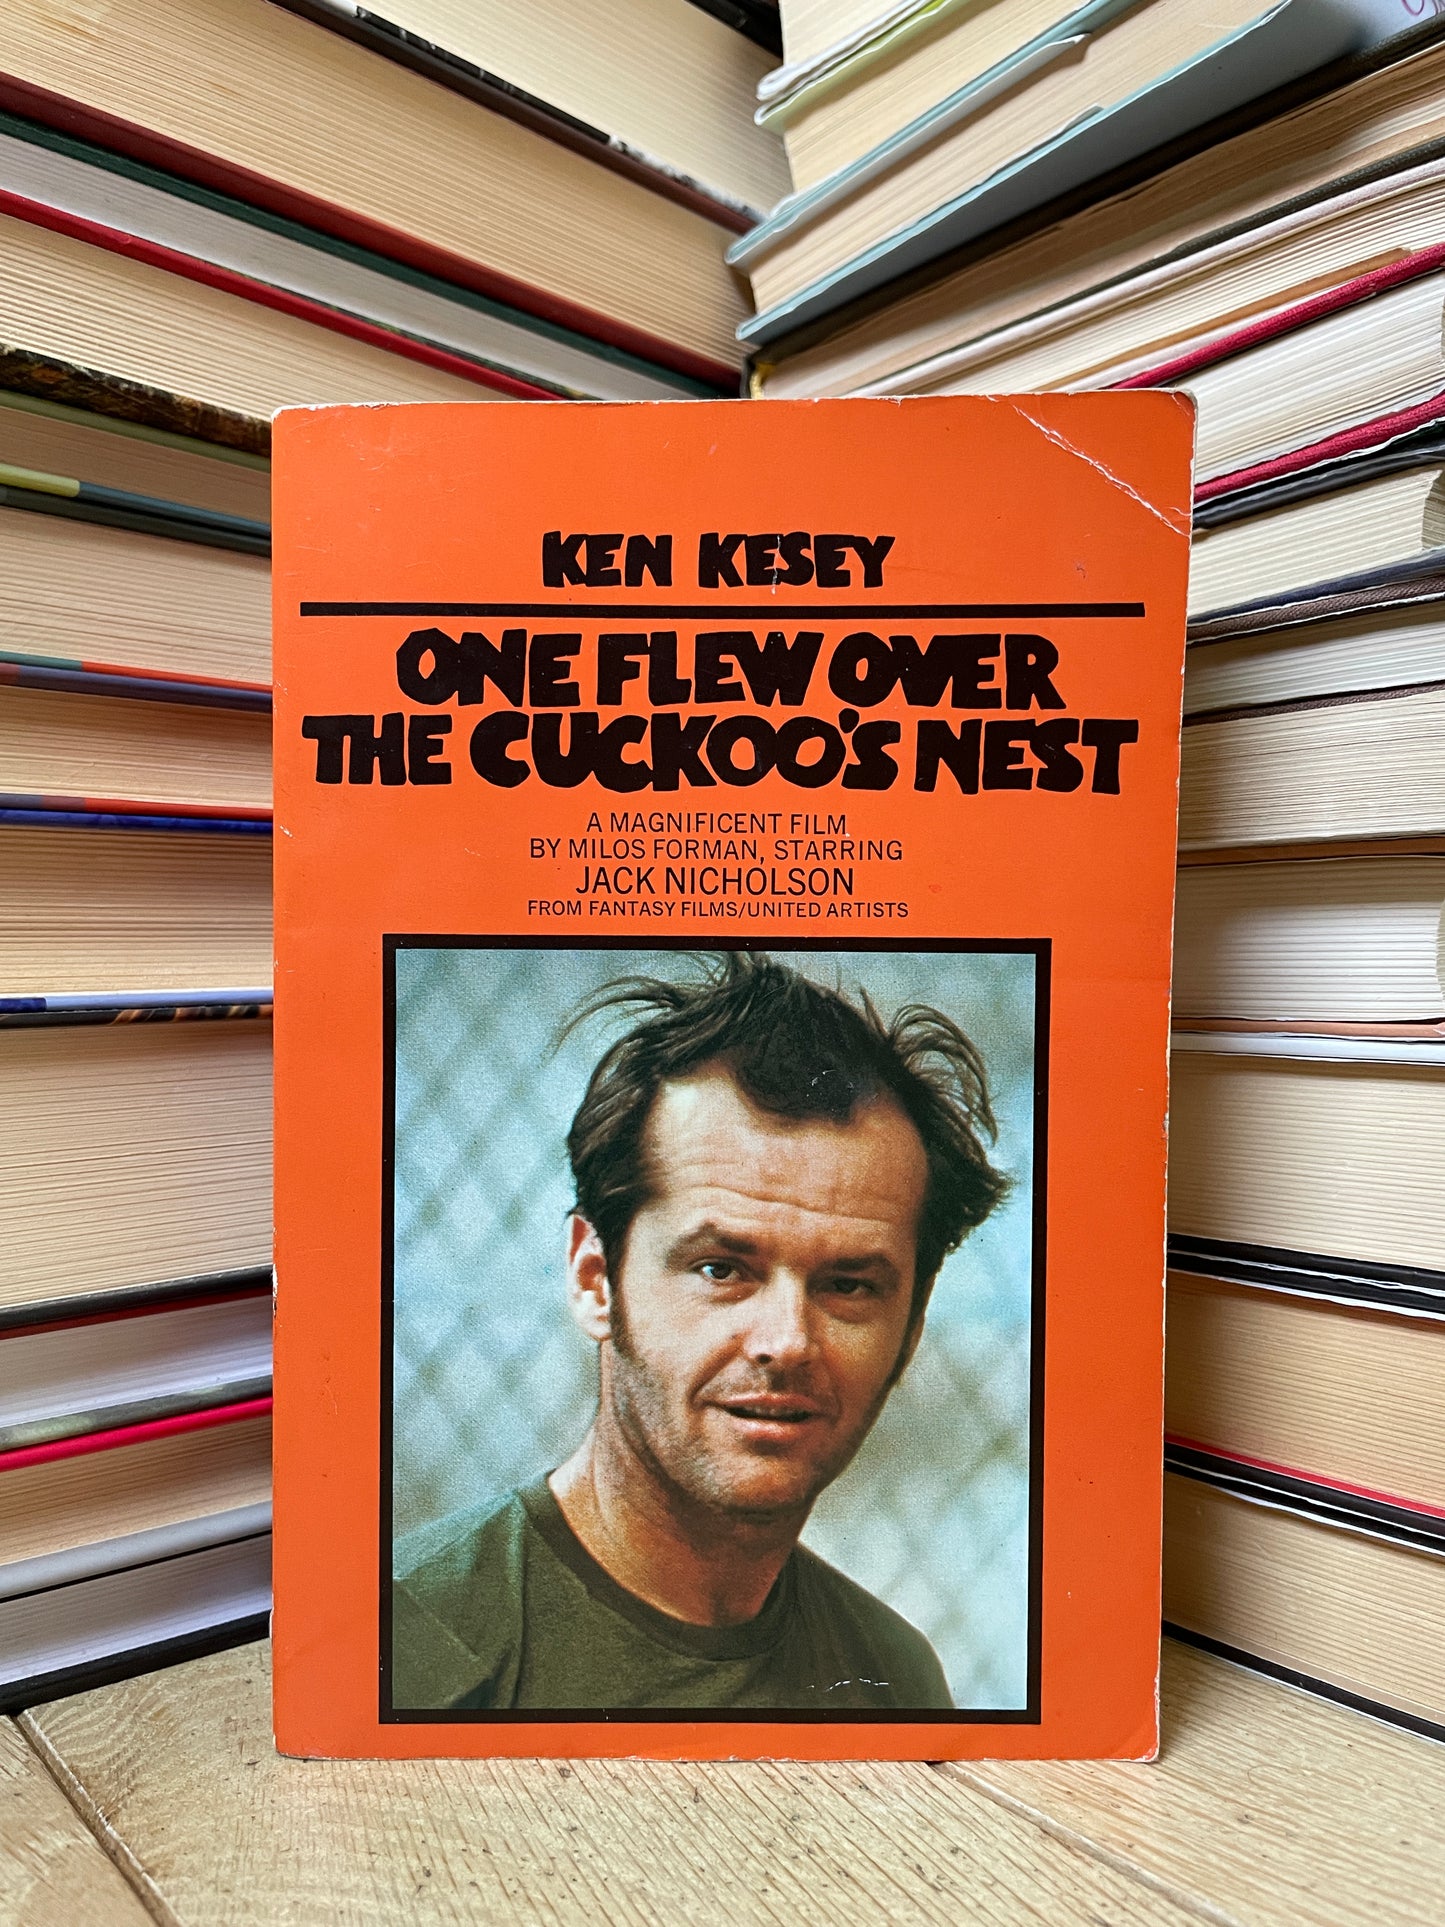 Ken Kesey - One Flew Over the Cuckoo's Nest